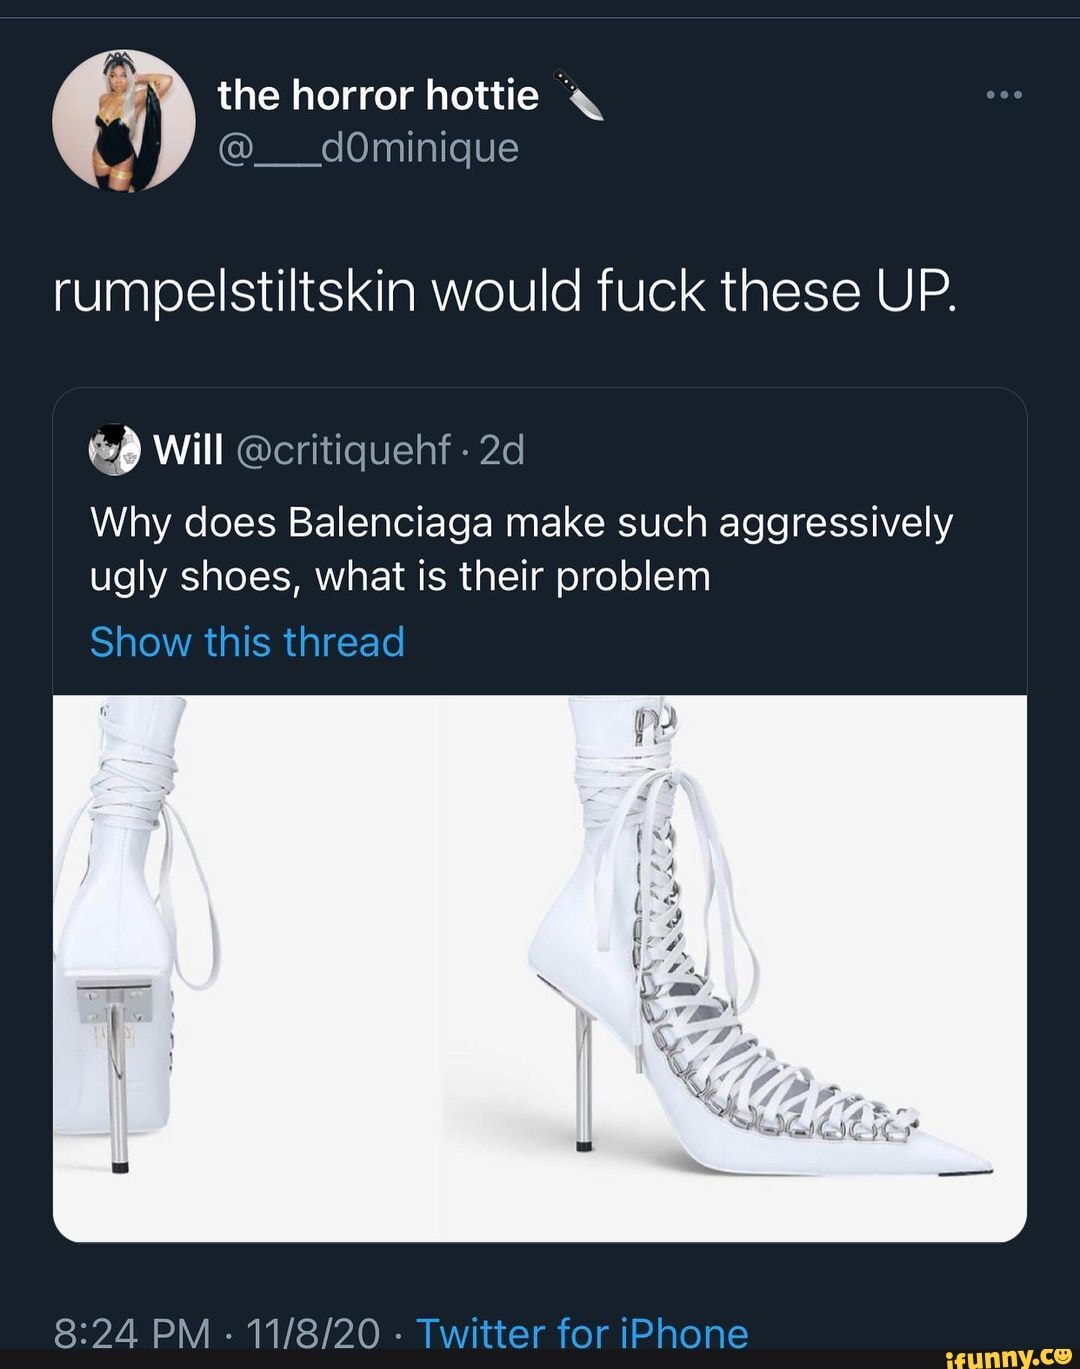 The horror hottie @___dOminique rumpelstiltskin would fuck these UP. Will @critiquehf Why does Balenciaga make such aggressively ugly shoes, what is their Show this thread ag AAIRIAR an... - )